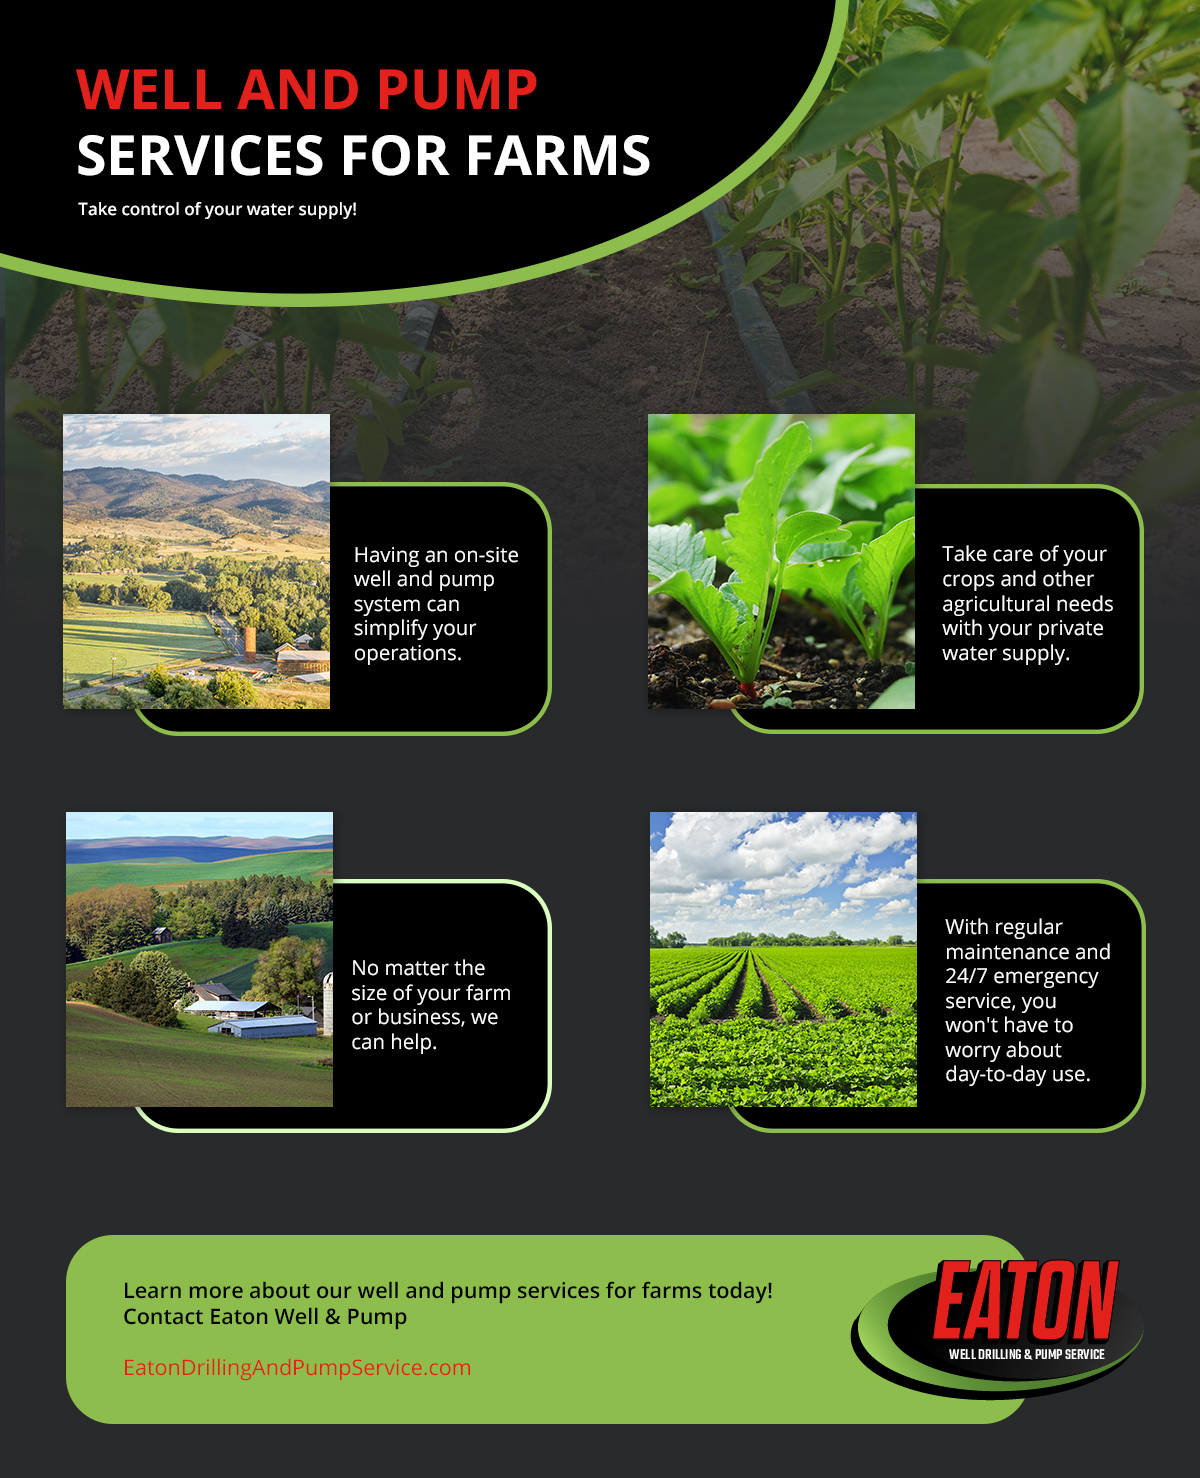 Well-And-Pump-Services-For-Farms-Infographic-6058e206d12c8